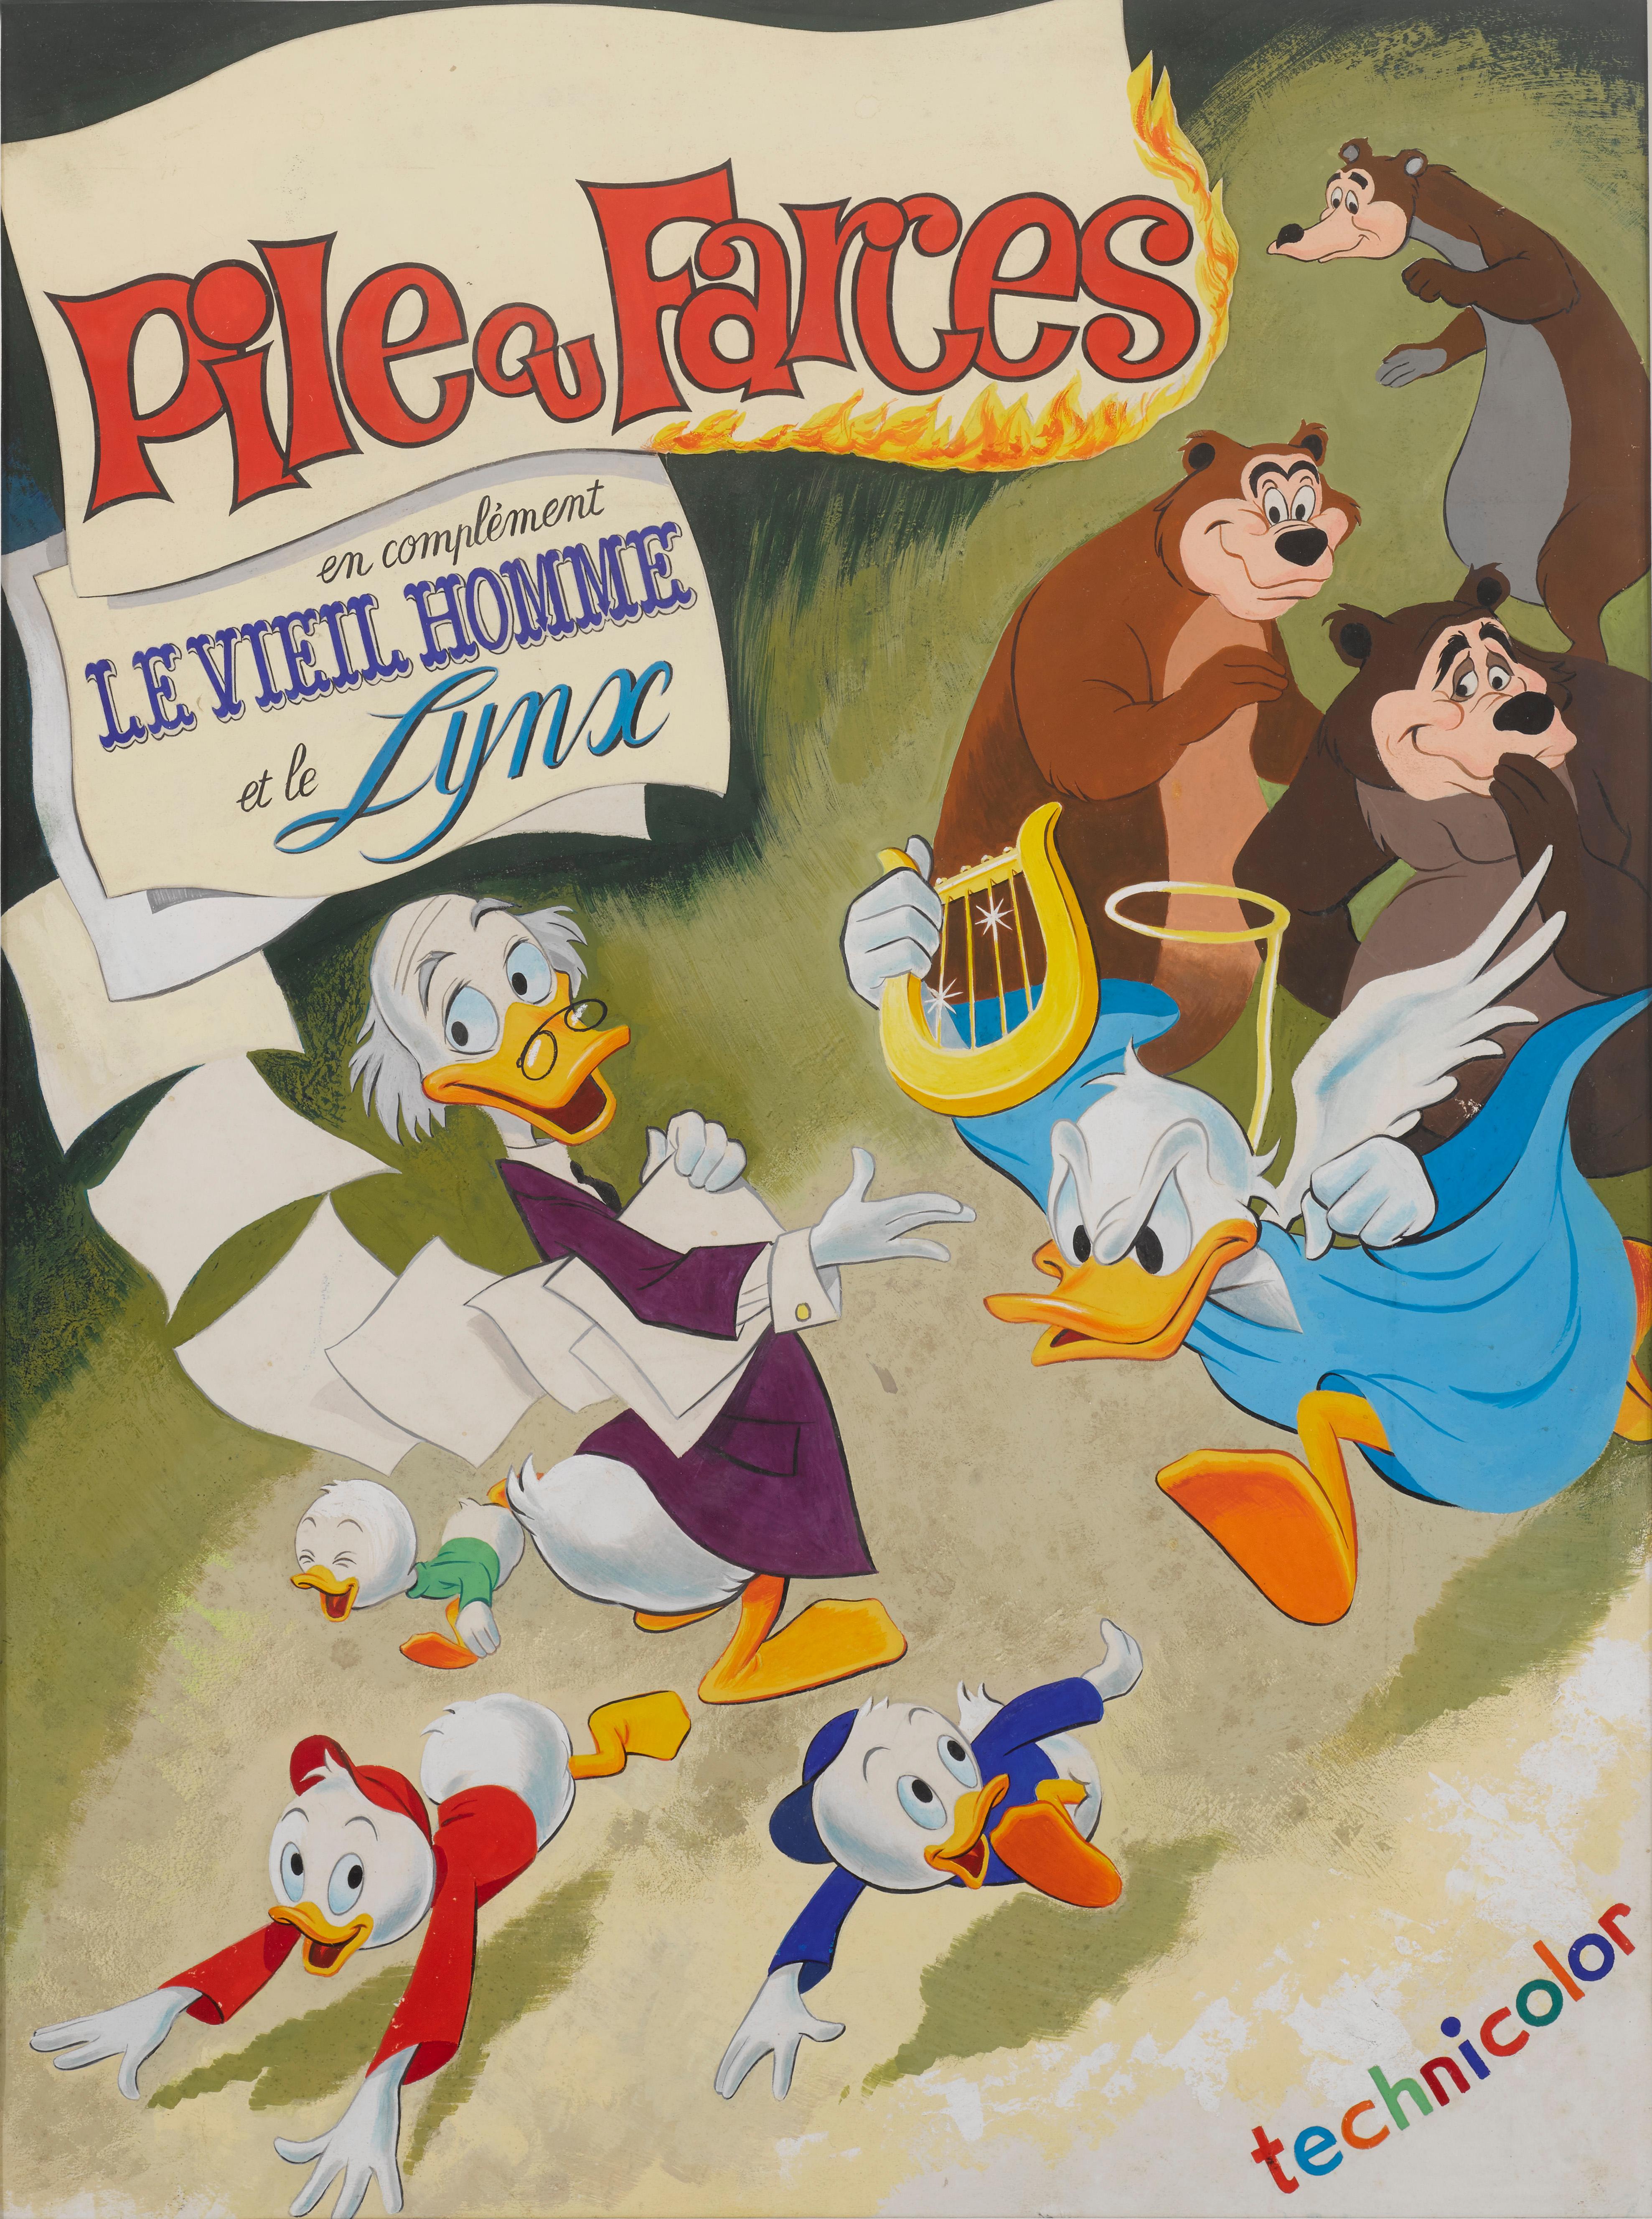 Original French film poster artwork gouache on art board for Walt Disney's 1949 Donald's Happy Birthday animation.
This 1949 animated short features Donald Duck and his nephews Huey, Dewey, and Louie. A birthday gift of cigars goes amiss when